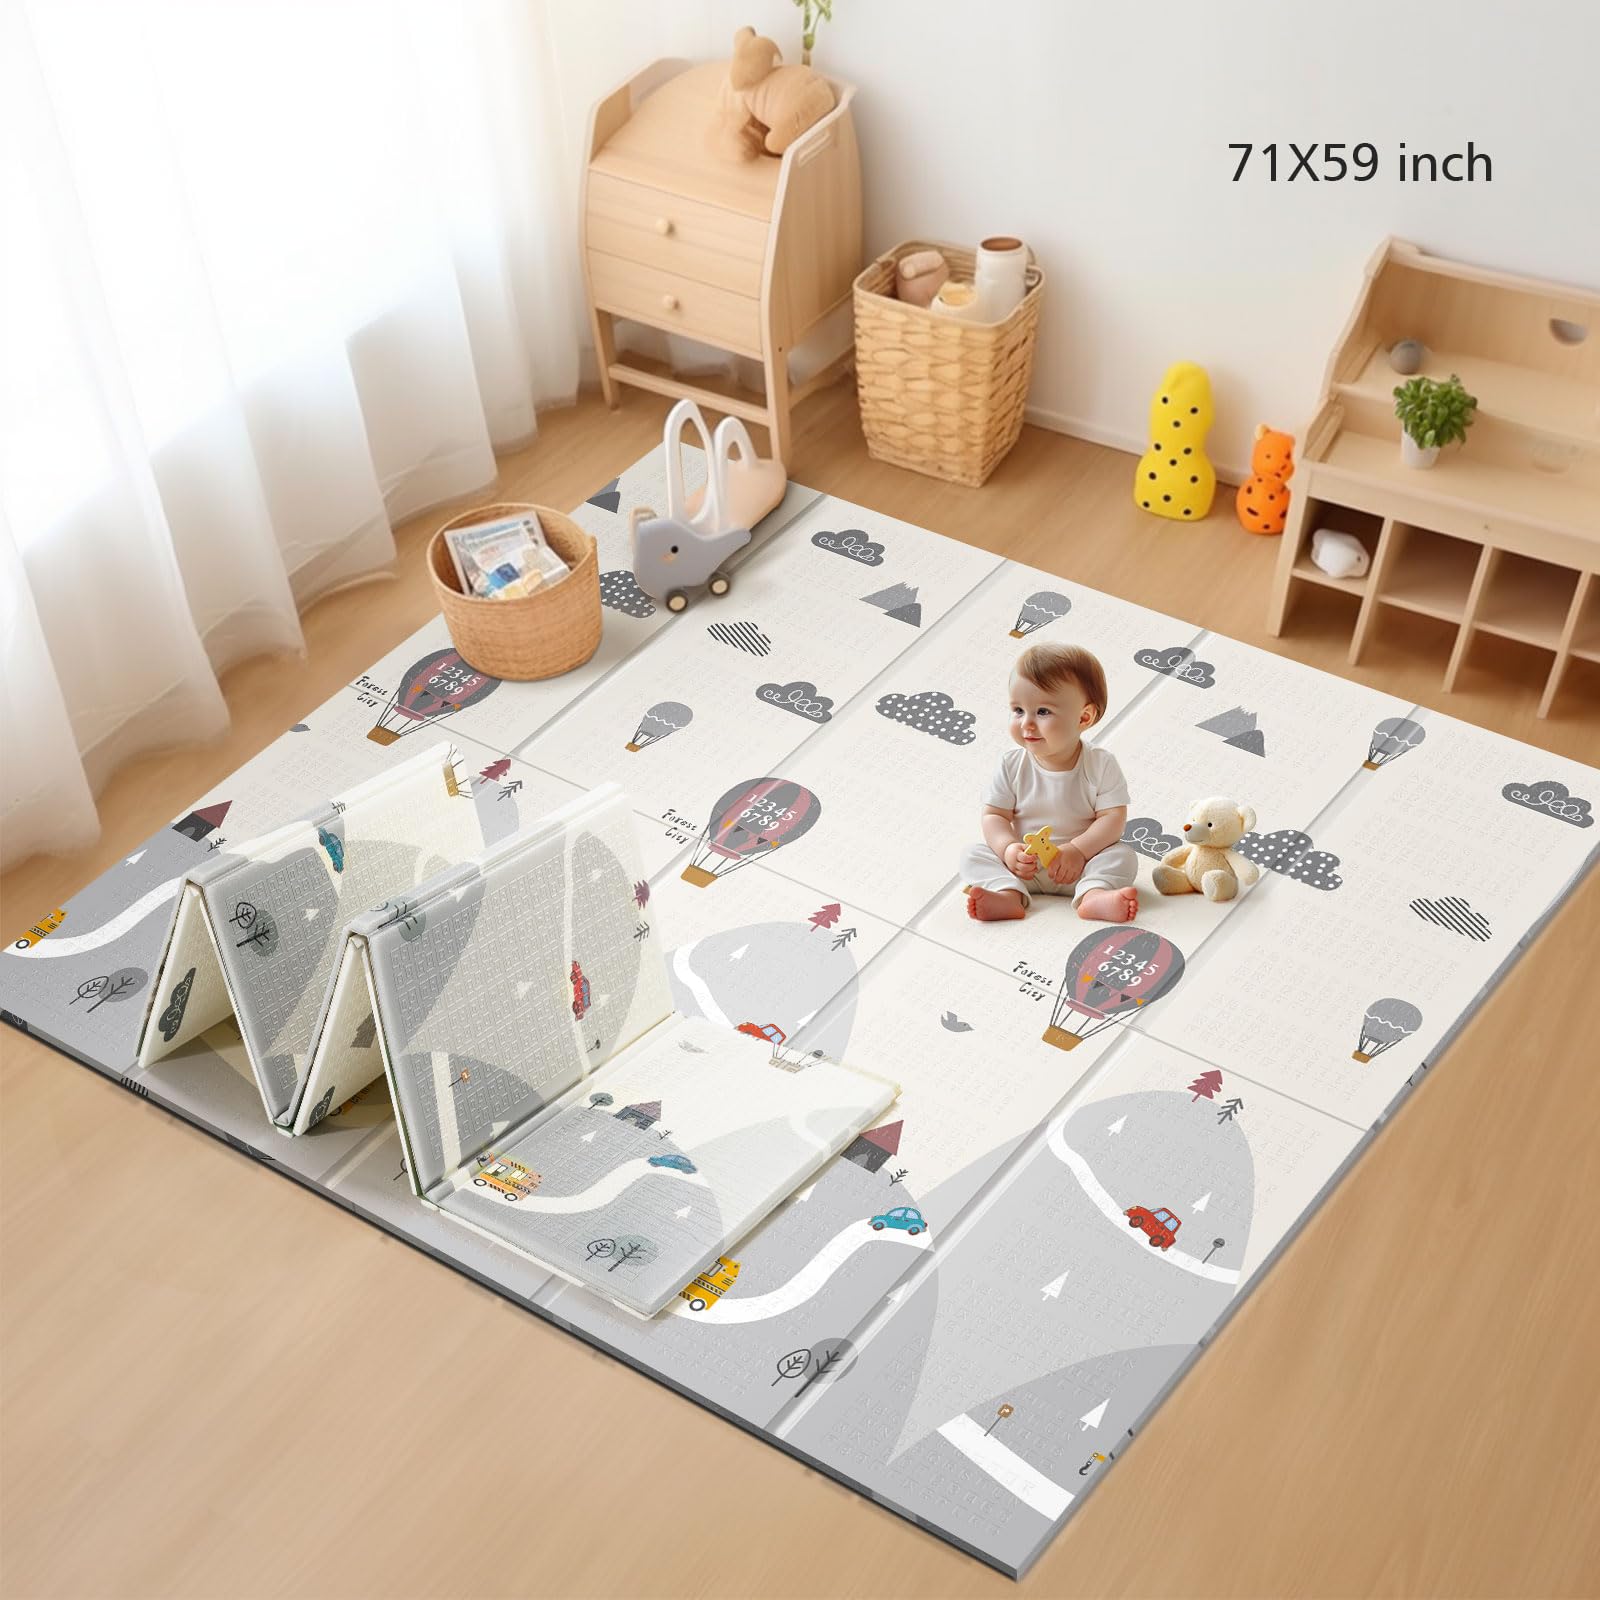 Baby Play Mat, 71 x59 Inches Foldable Play Mat for Floor, Reversible Play Mat for Infants, Toddlers, Kids, Play and Tummy Time, Anti-Slip Baby Crawling Mat for Indoor and Outdoor